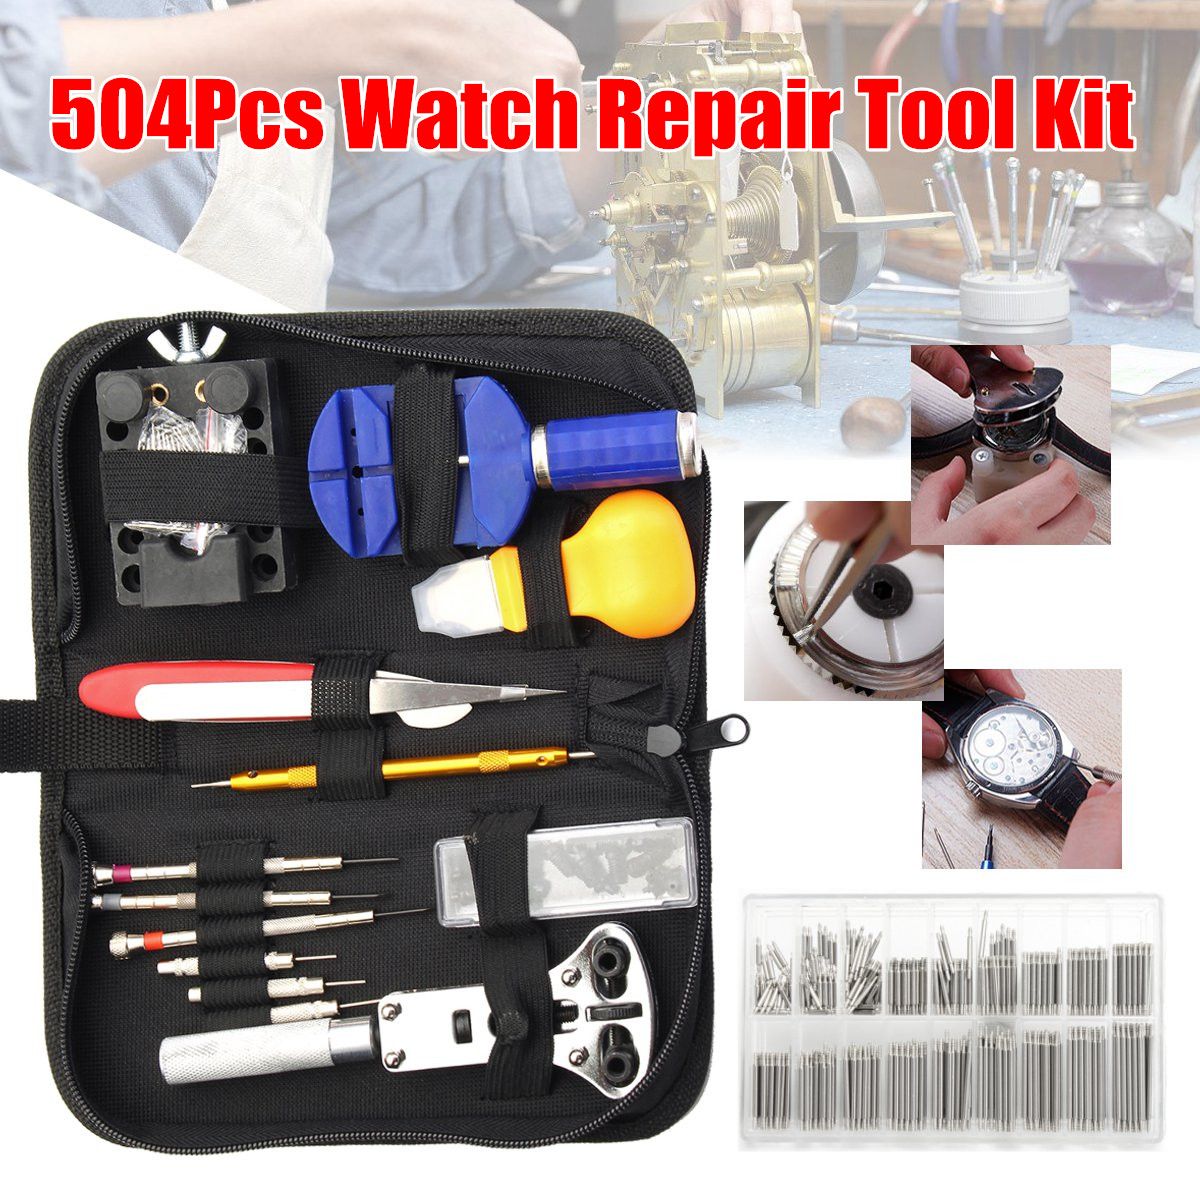 504Pcs-Watch-Repair-Tools-Kit-Back-Case-Band-Strap-Opener-Link-Remover-Spring-Bar-1352571